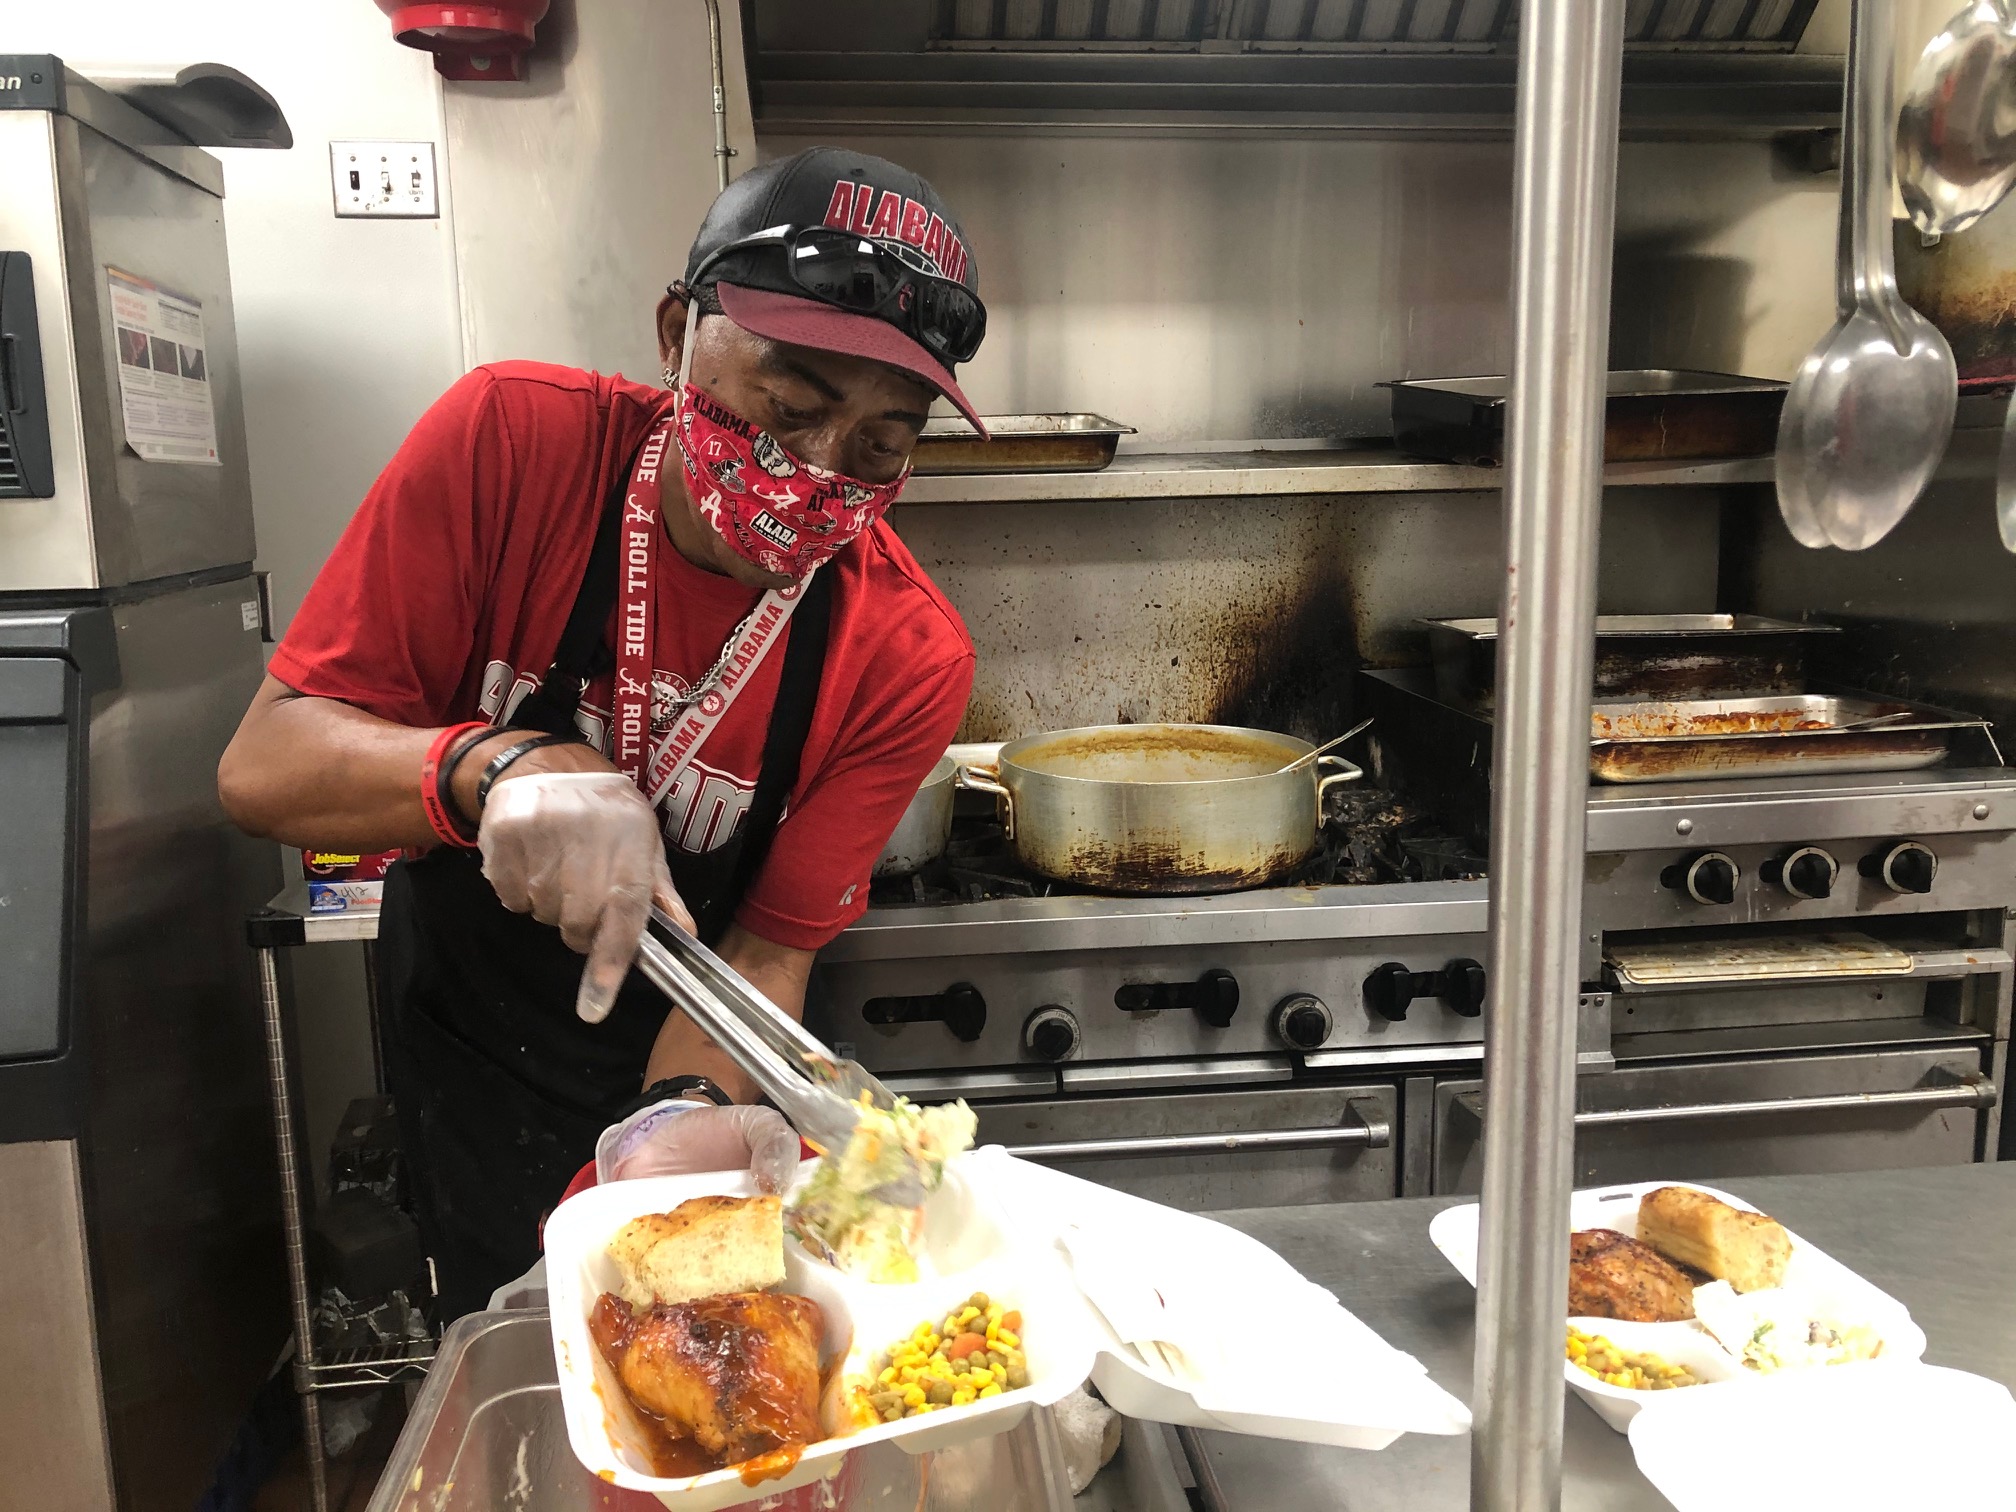 United Way Community Kitchens Birmingham warming station opens Nov. 30 to Dec. 1. Here is how you can help.